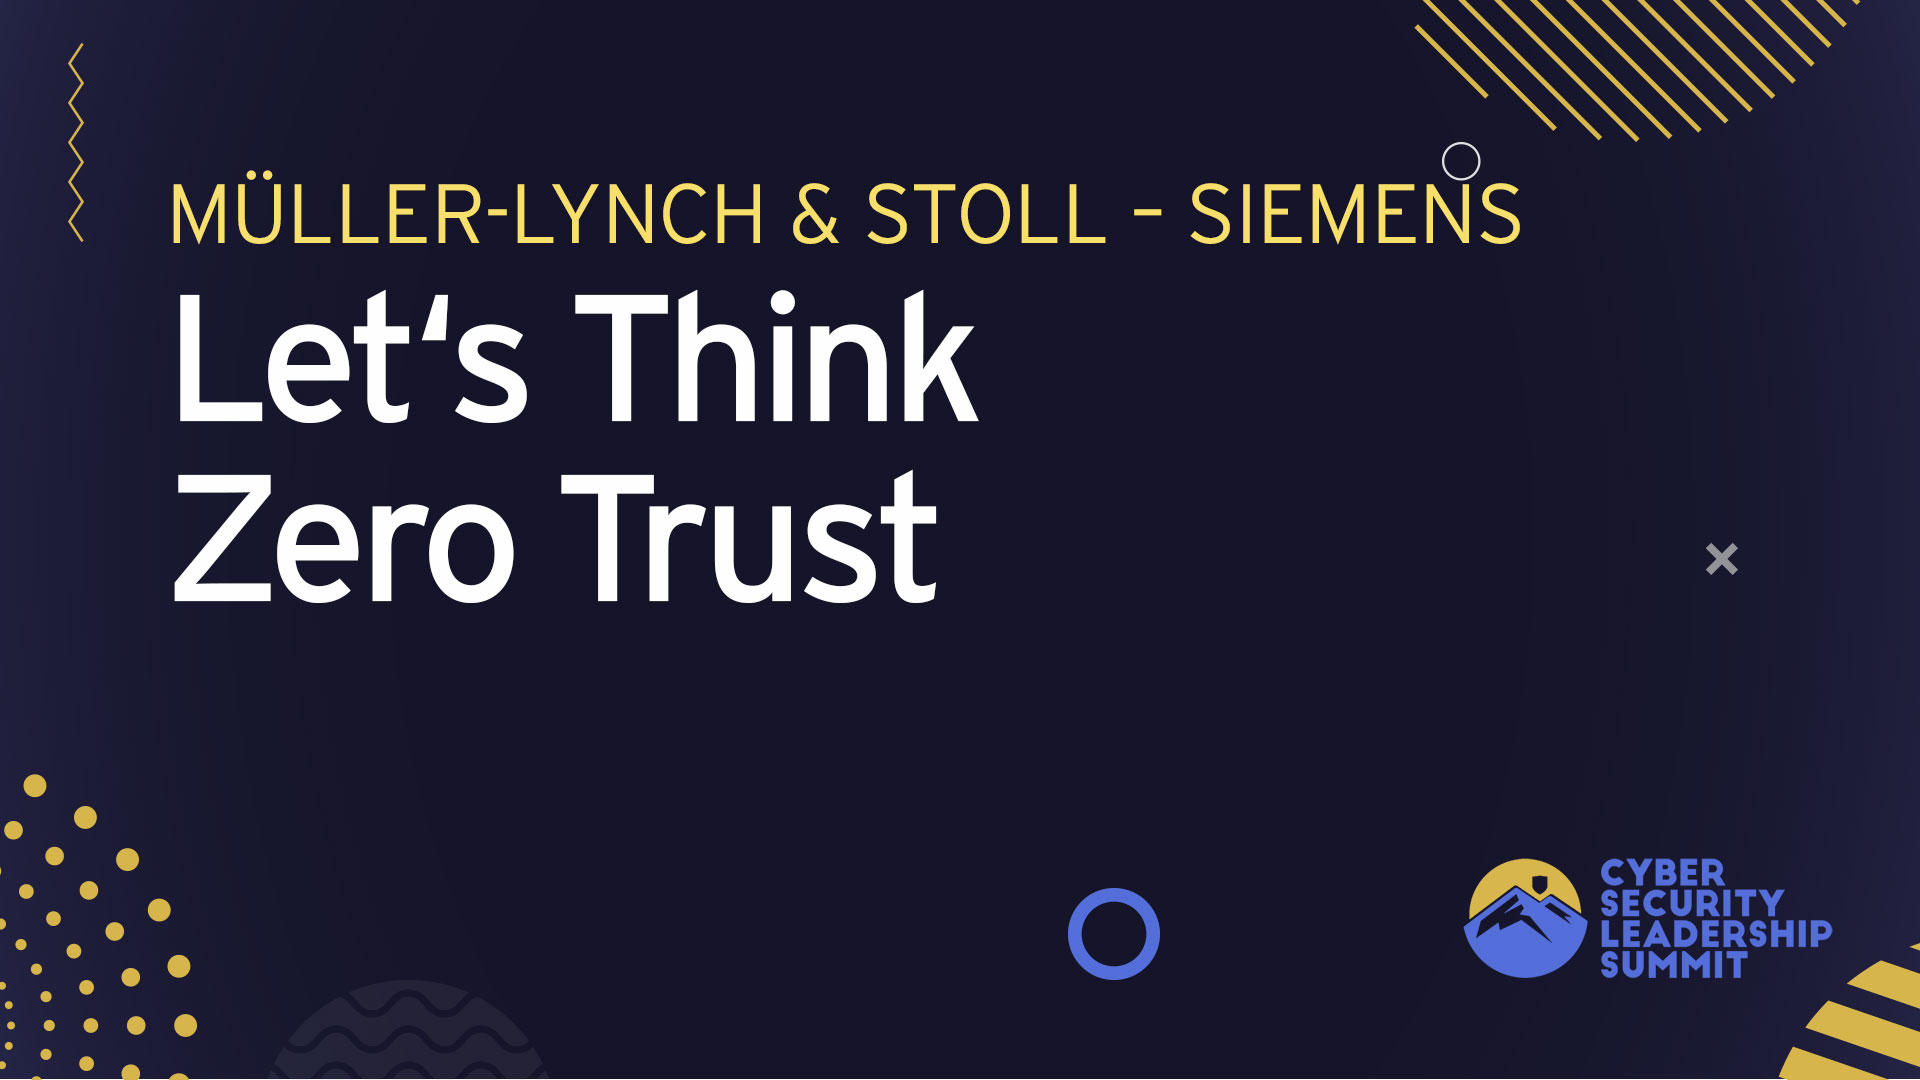 Let’s Think Zero Trust – for IT, OT and Products